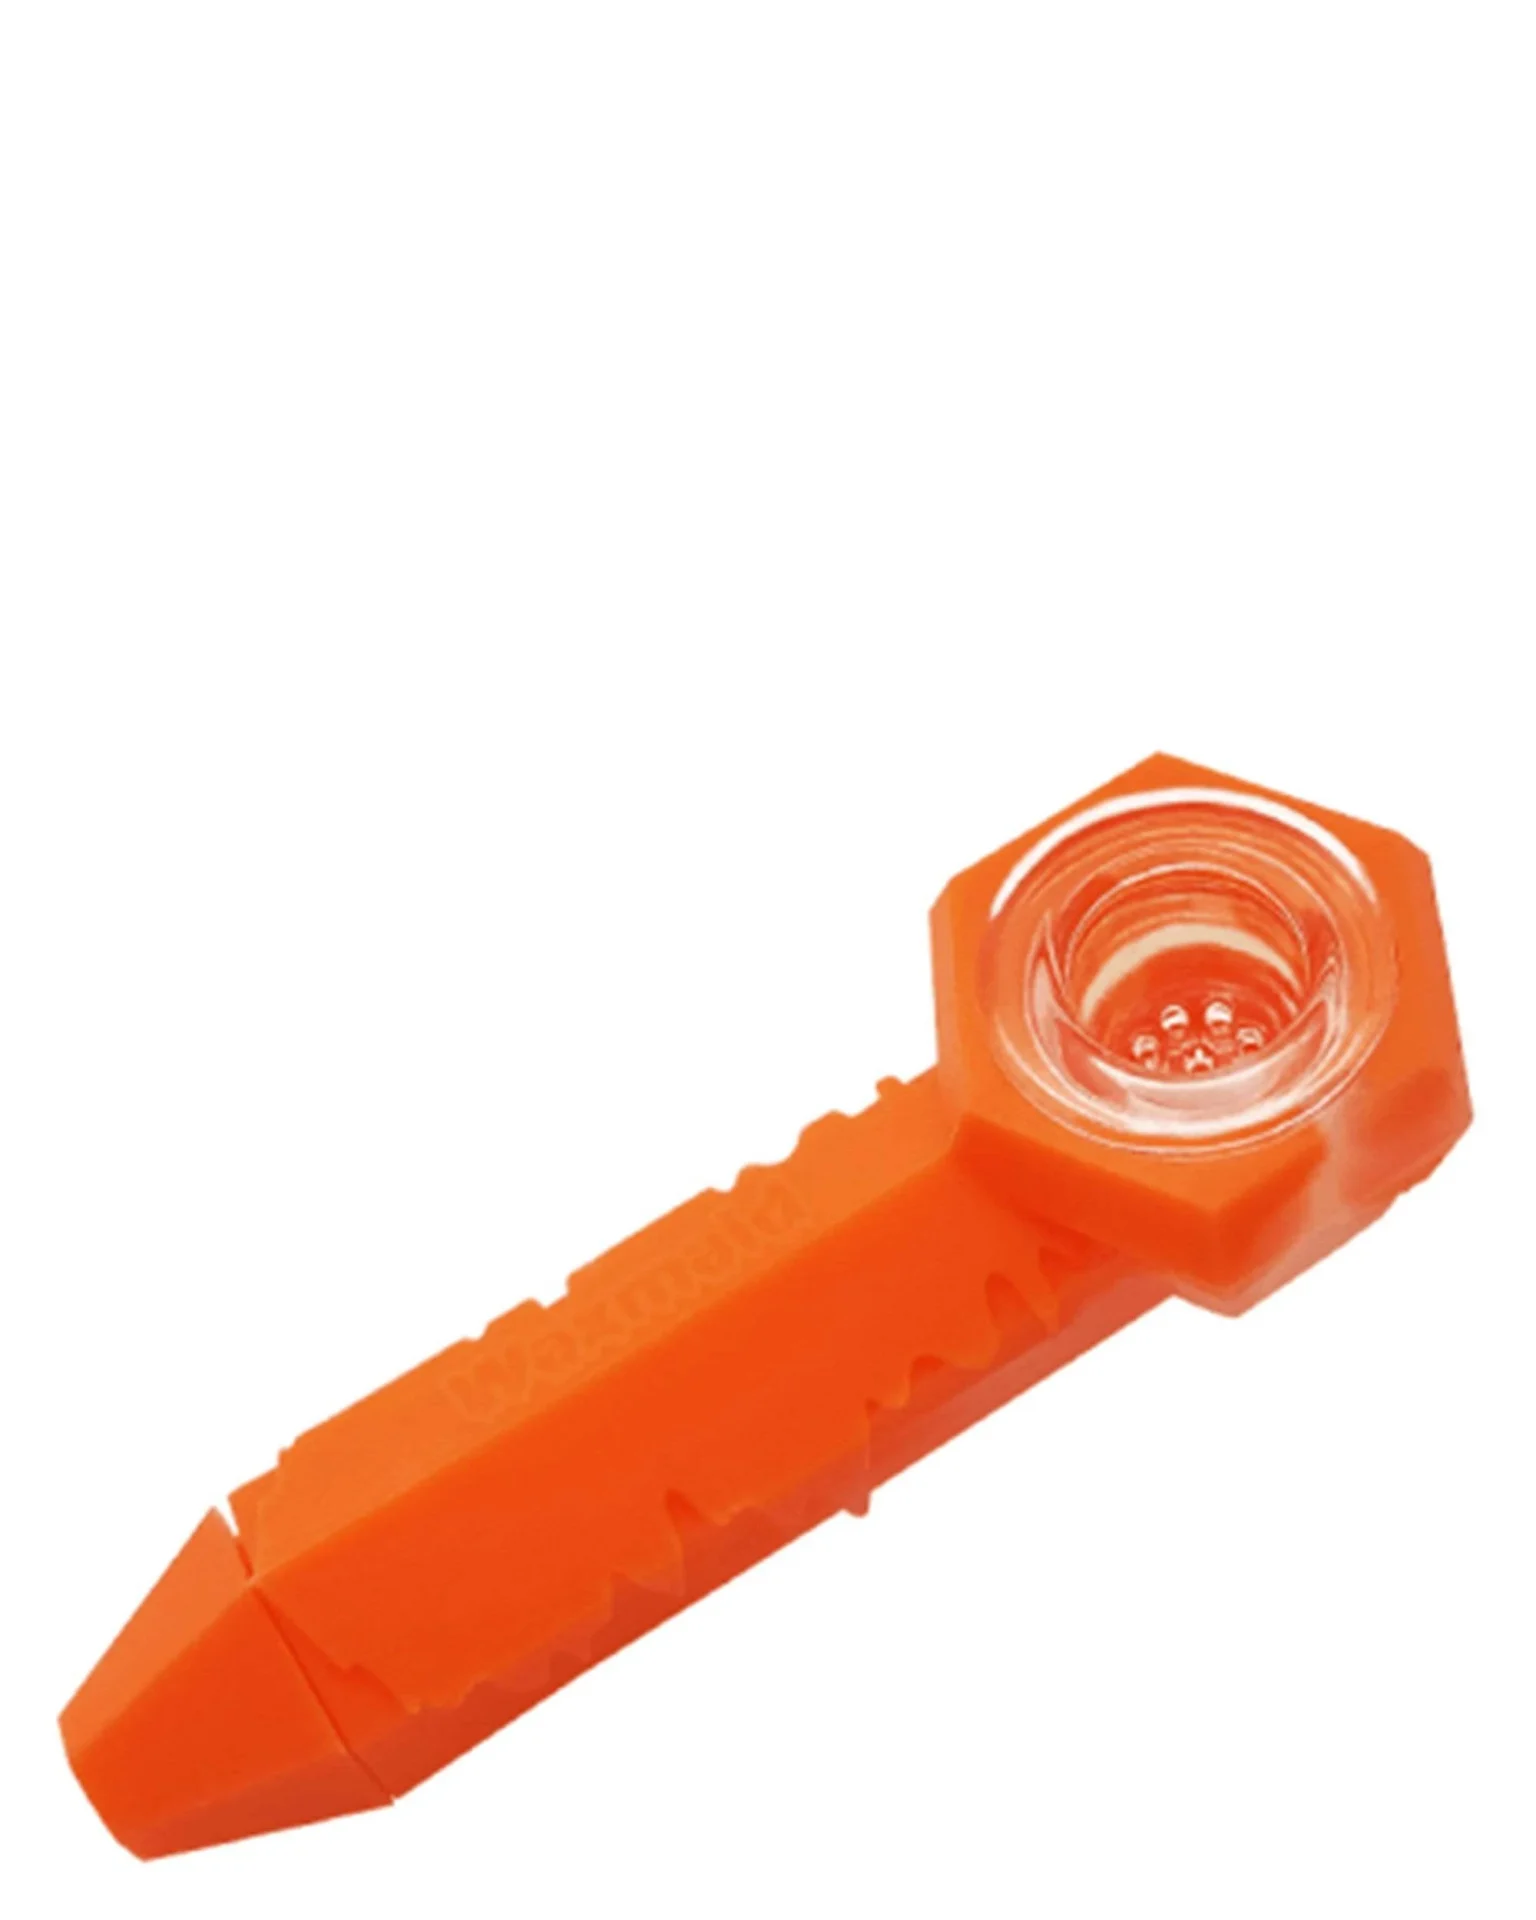 waxmaid freezable silicone ice spoon pipe translucent orange hand pipe 723685128028 28414170529866